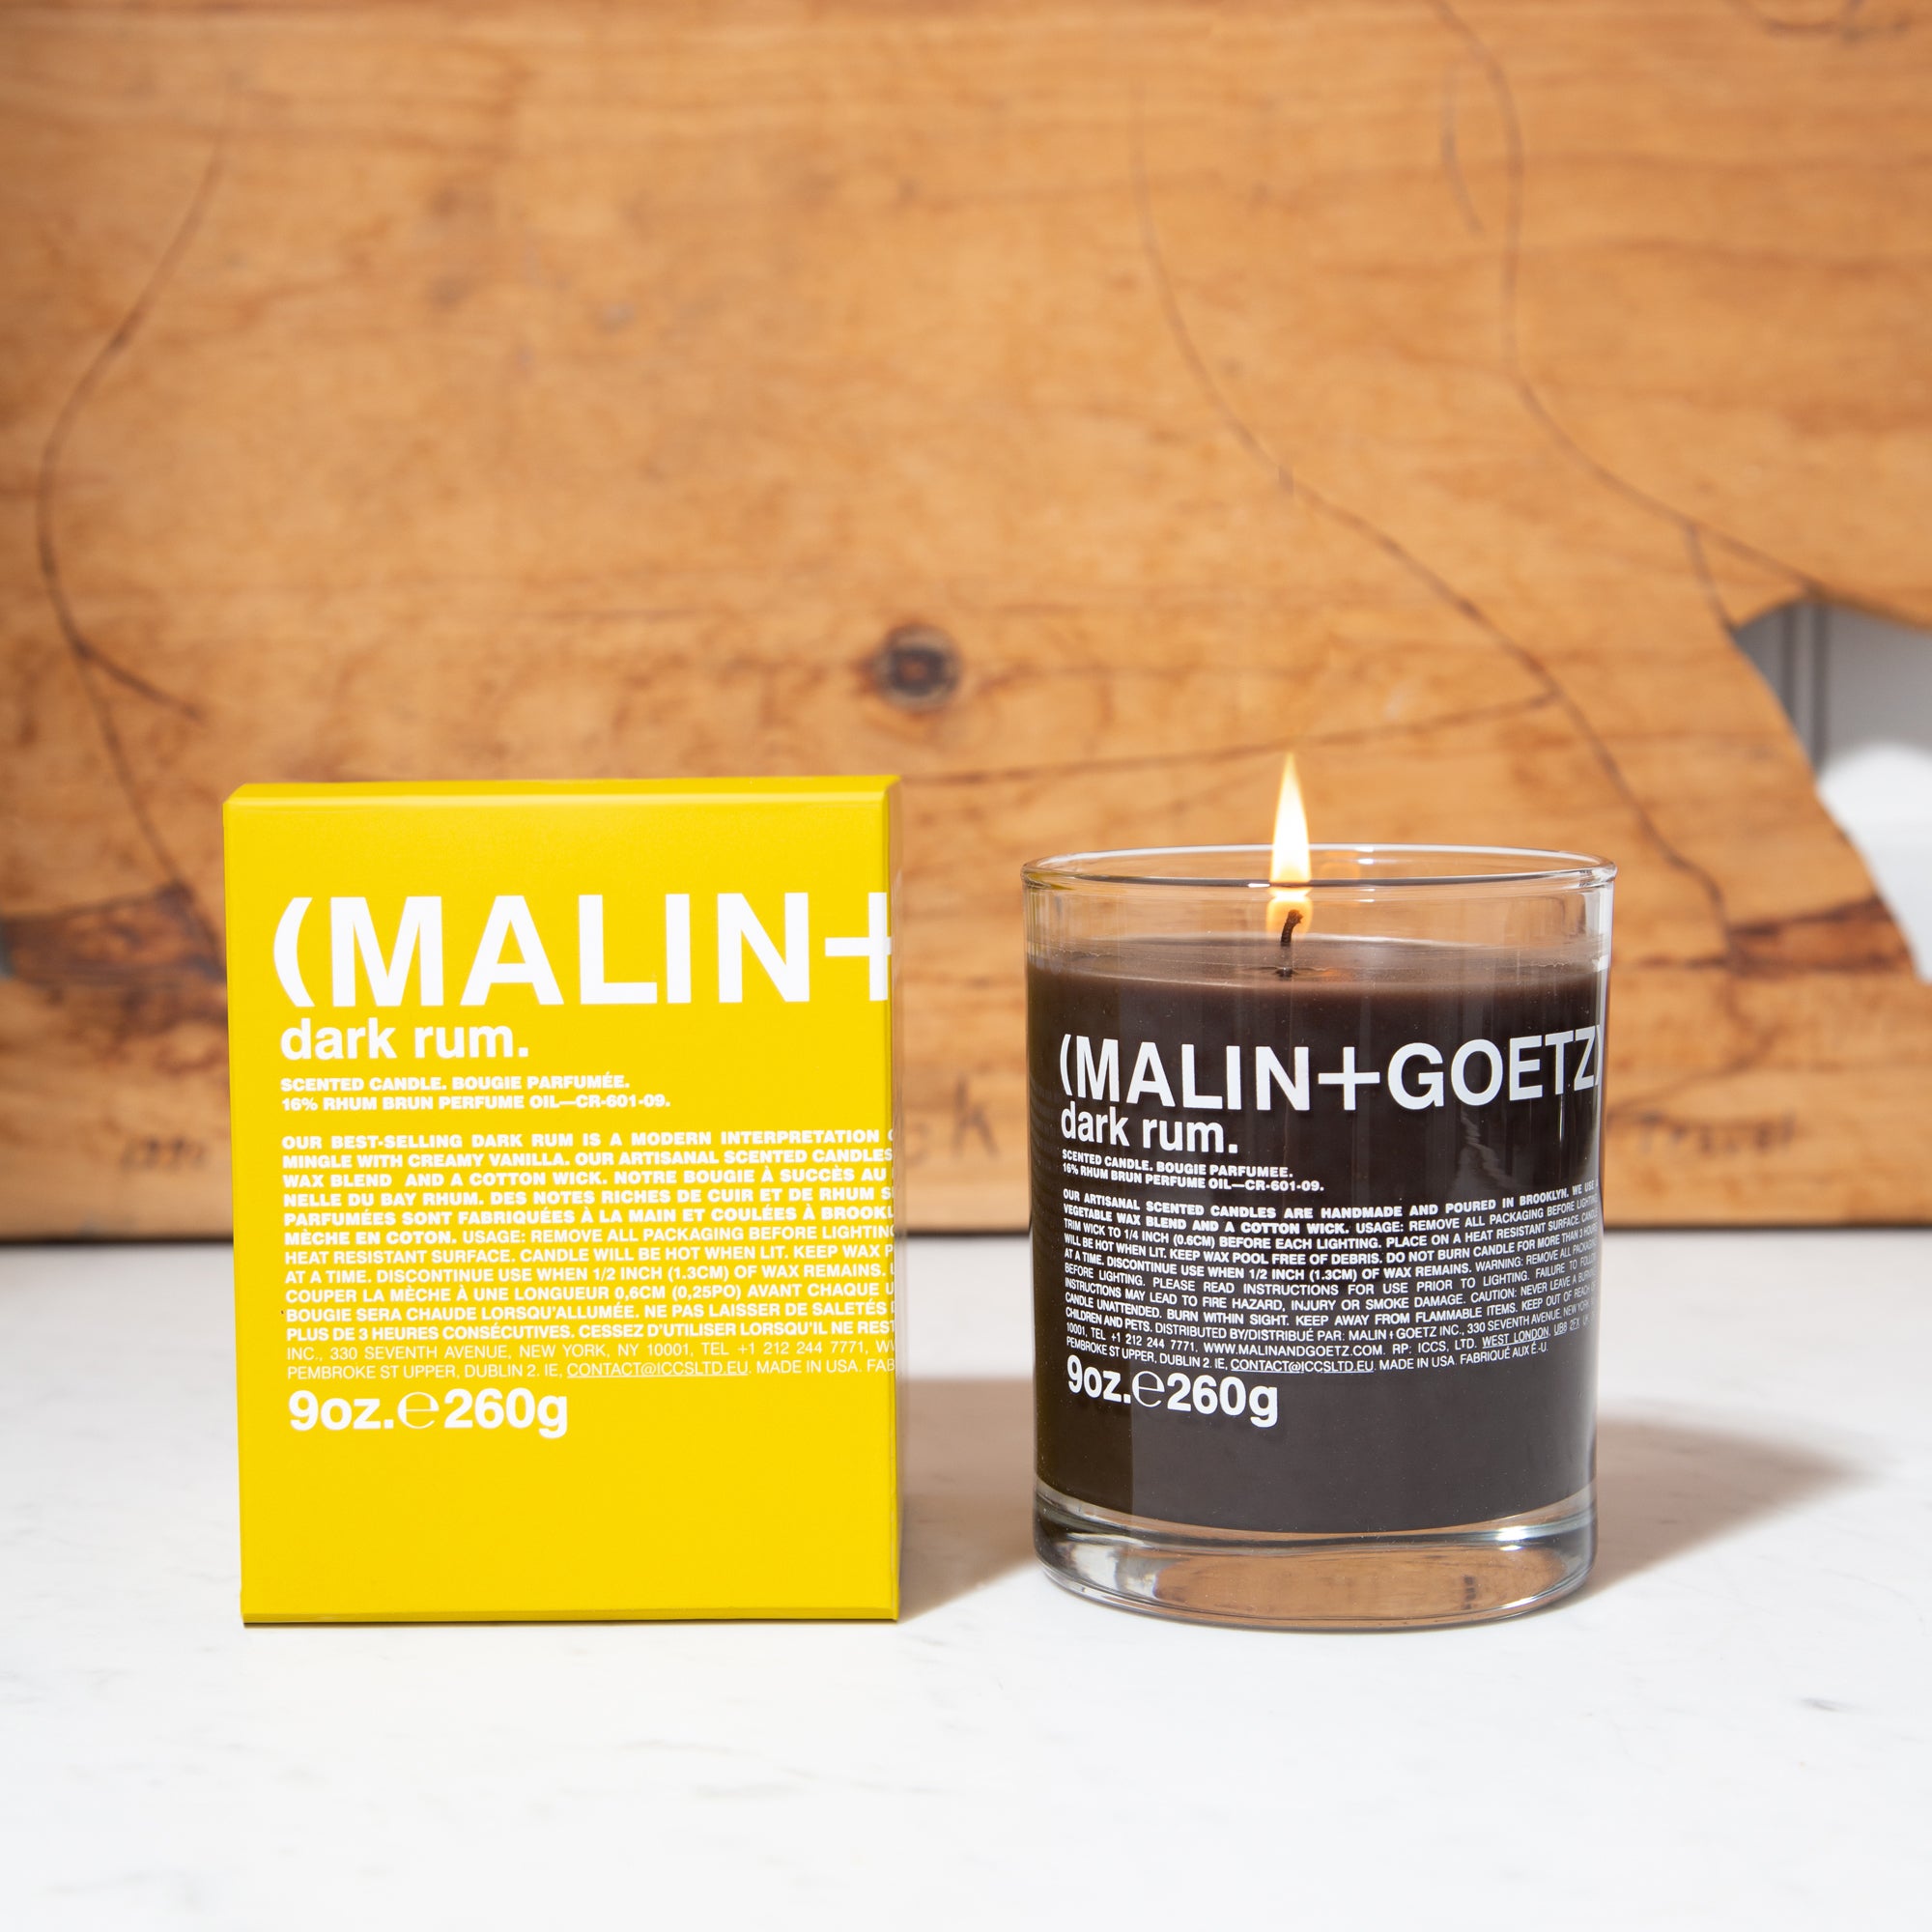 The Dark Rum candle from Malin and Goetz’s Vices collection is designed to conjure a feeling of nostalgia